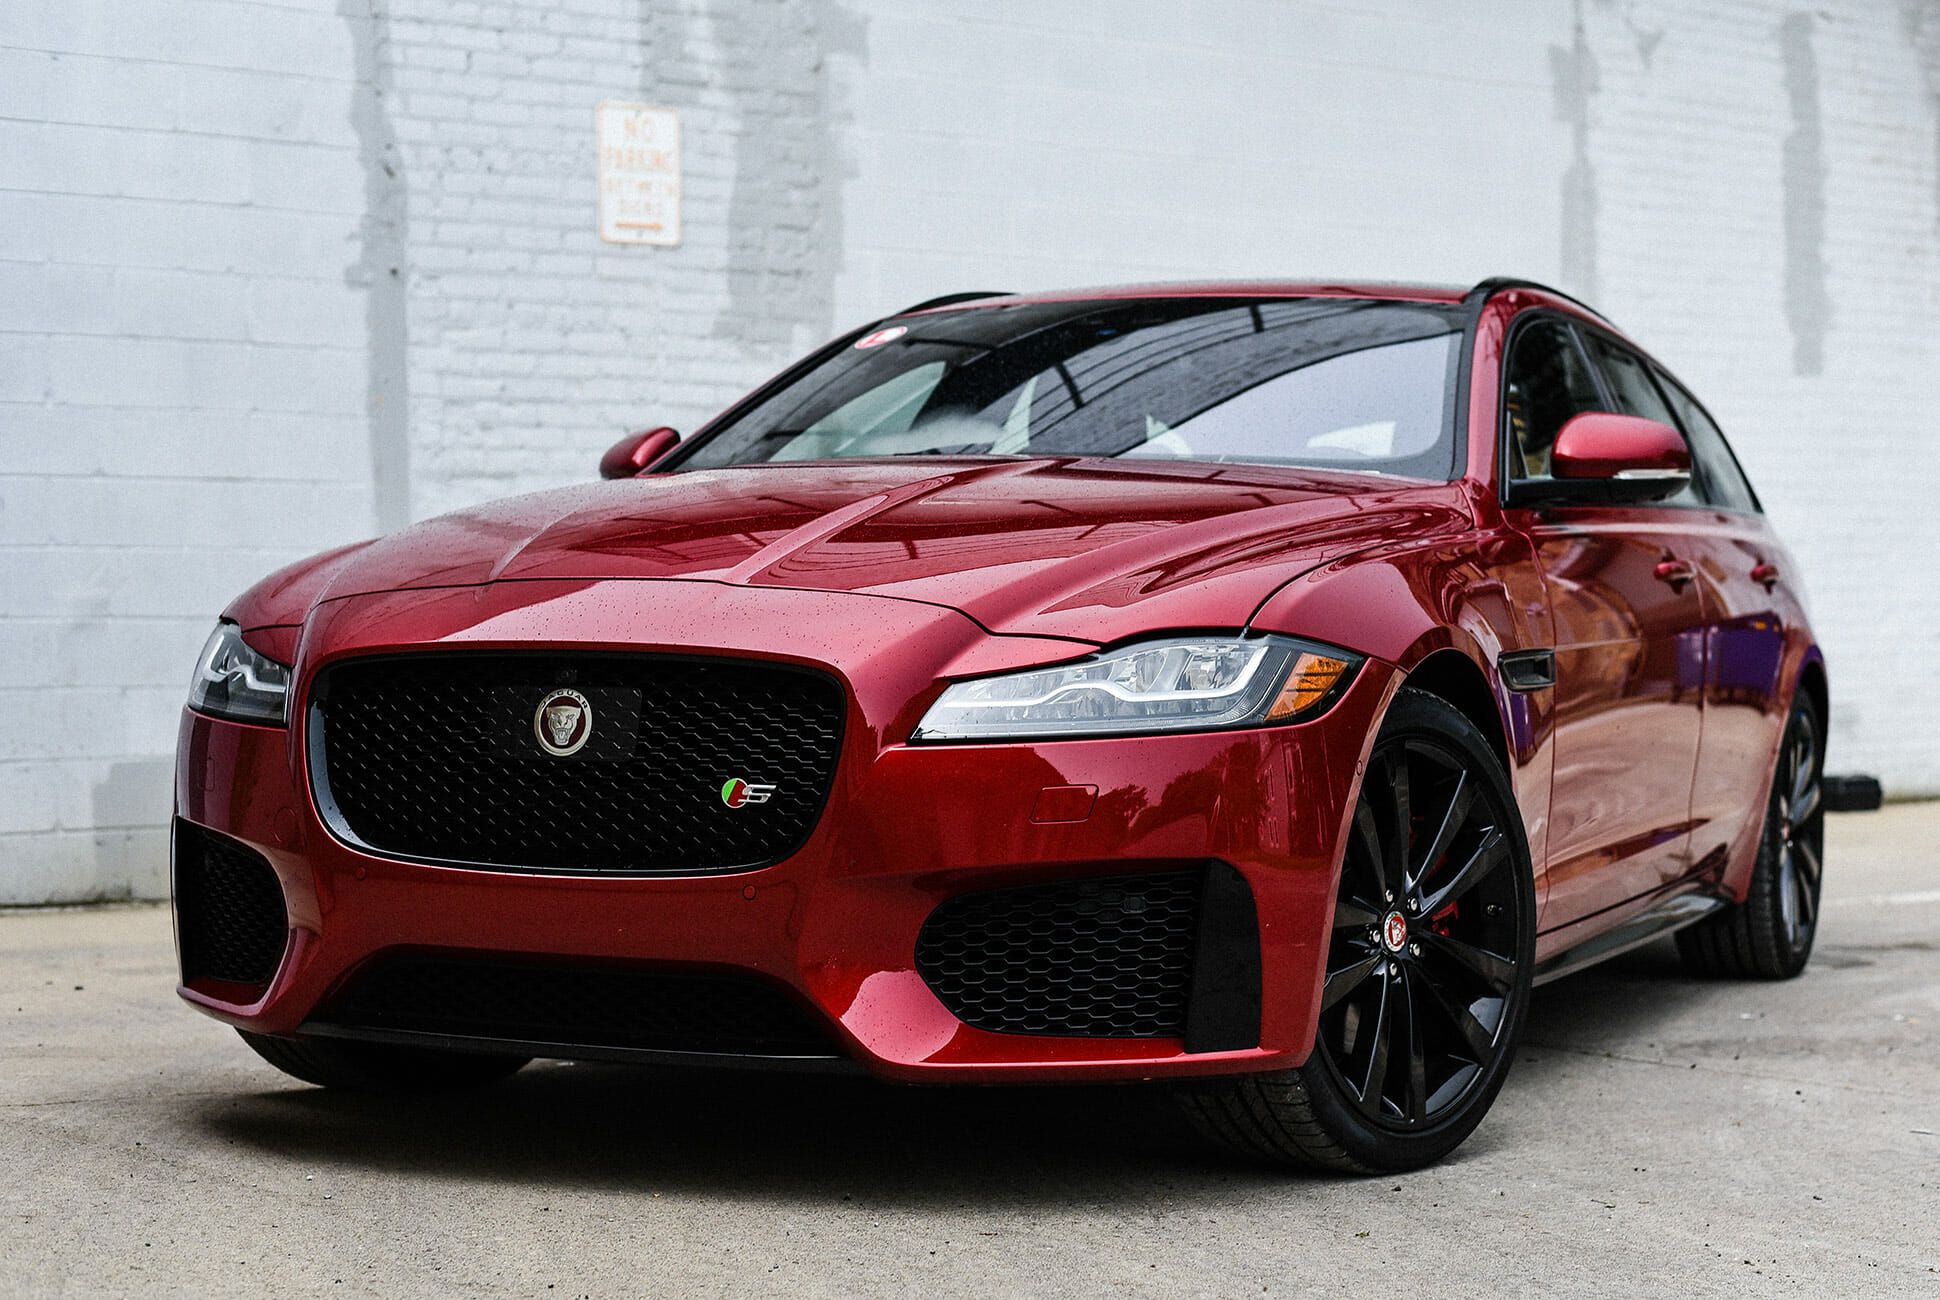 Jaguar XF Review: This Sexy, Supercharged Wagon Makes Practicality Fun